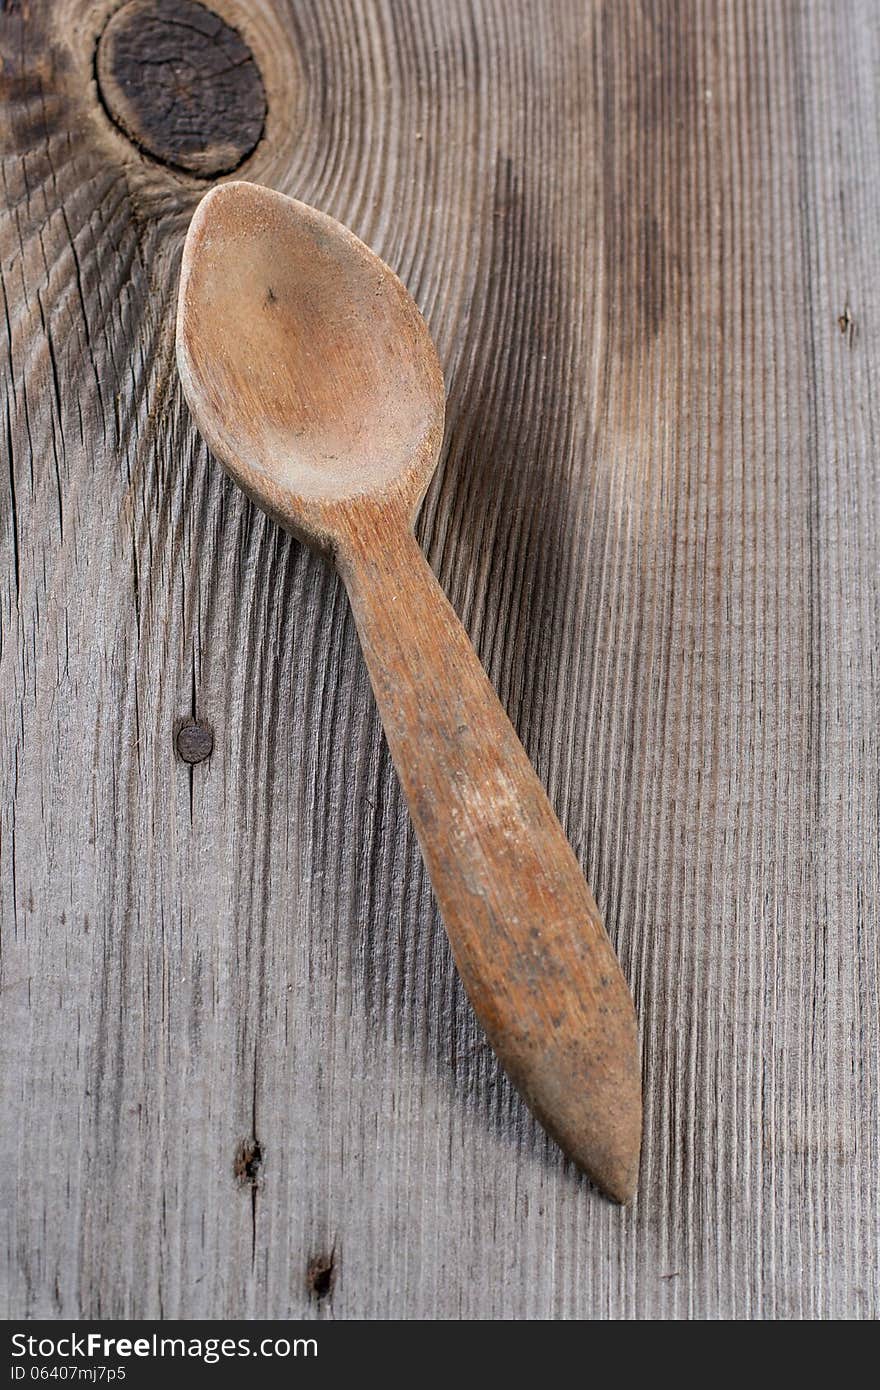 Old wooden spoon on wooden background. Old wooden spoon on wooden background